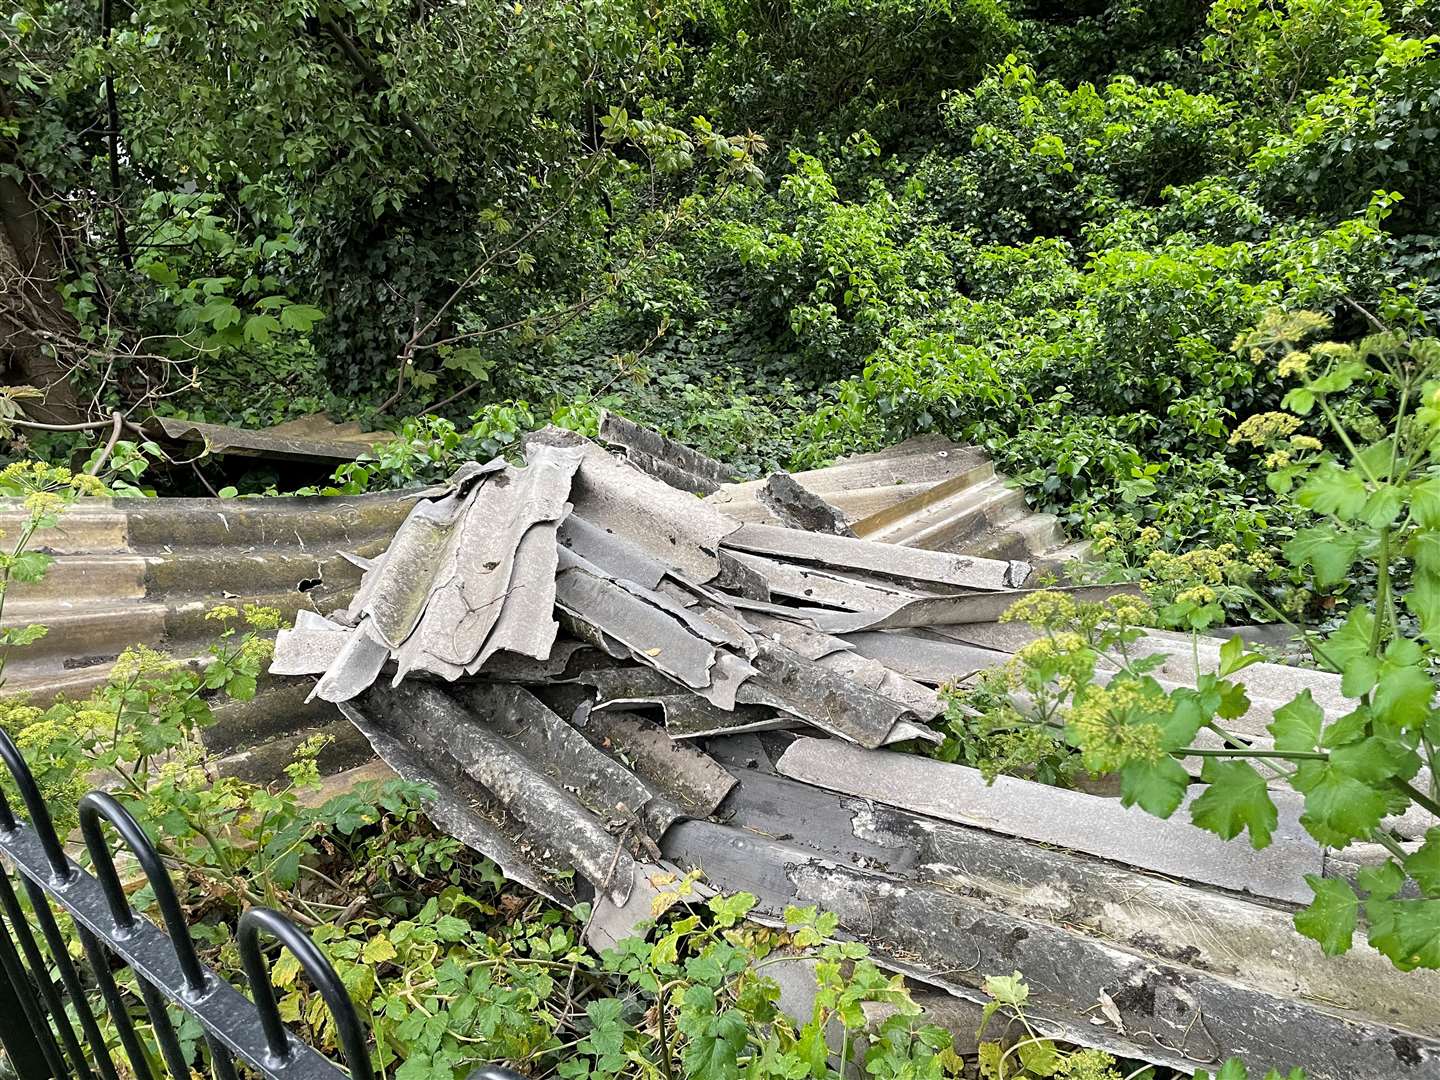 Several piles of roofing material have also been fly-tipped